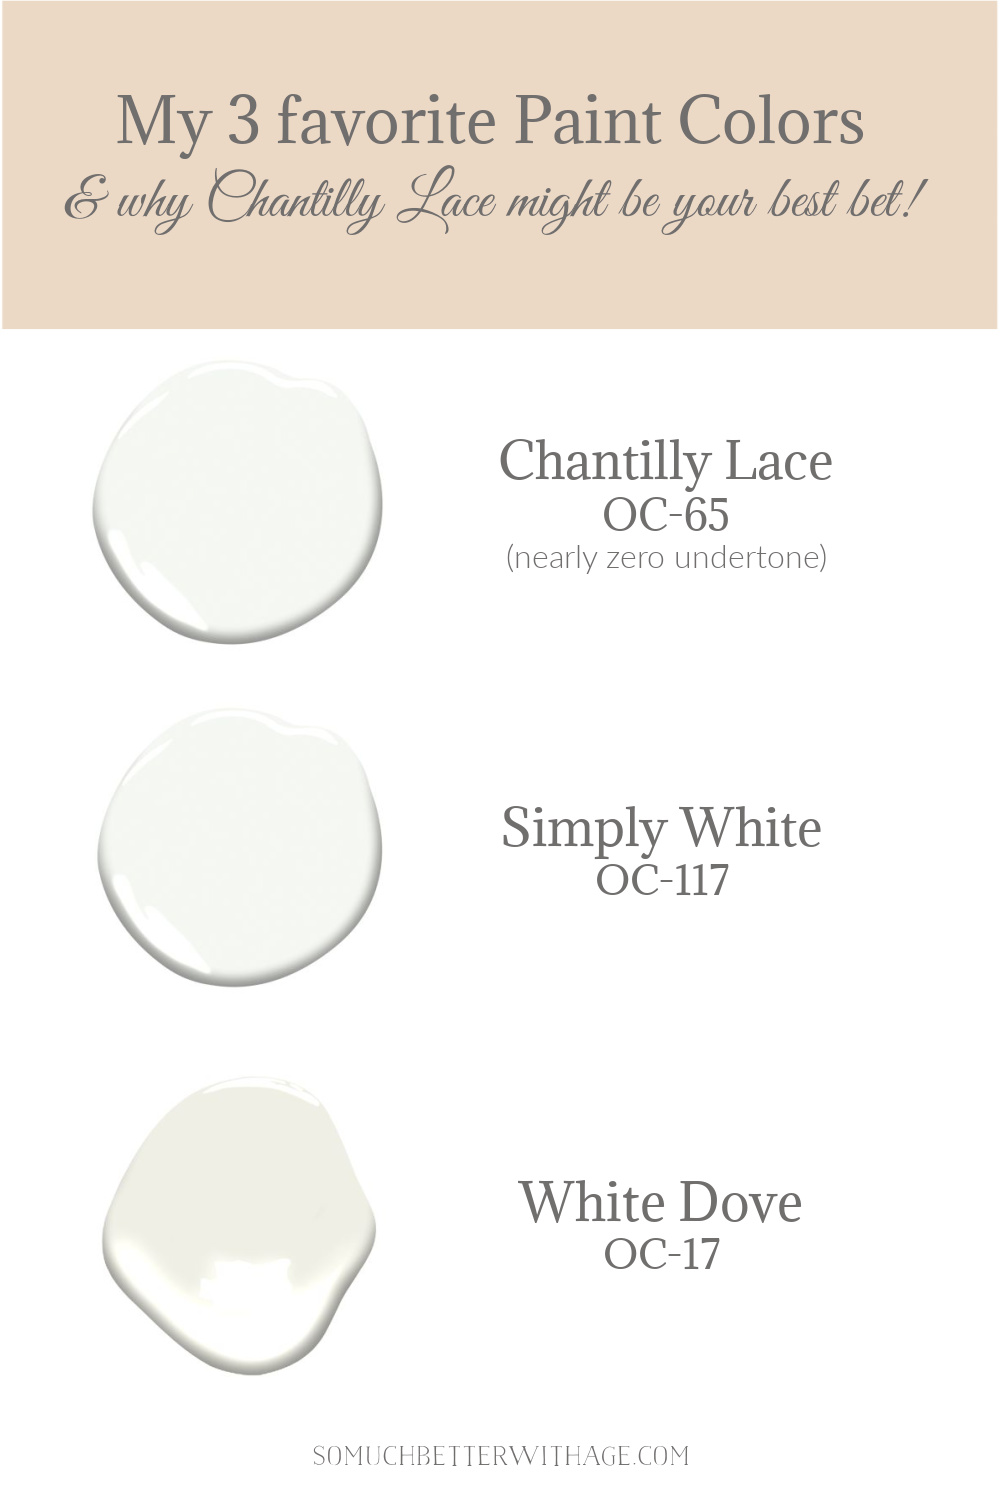 Chantilly Lace by Benjamin Moore – Why It Might Be The Perfect White Paint Color